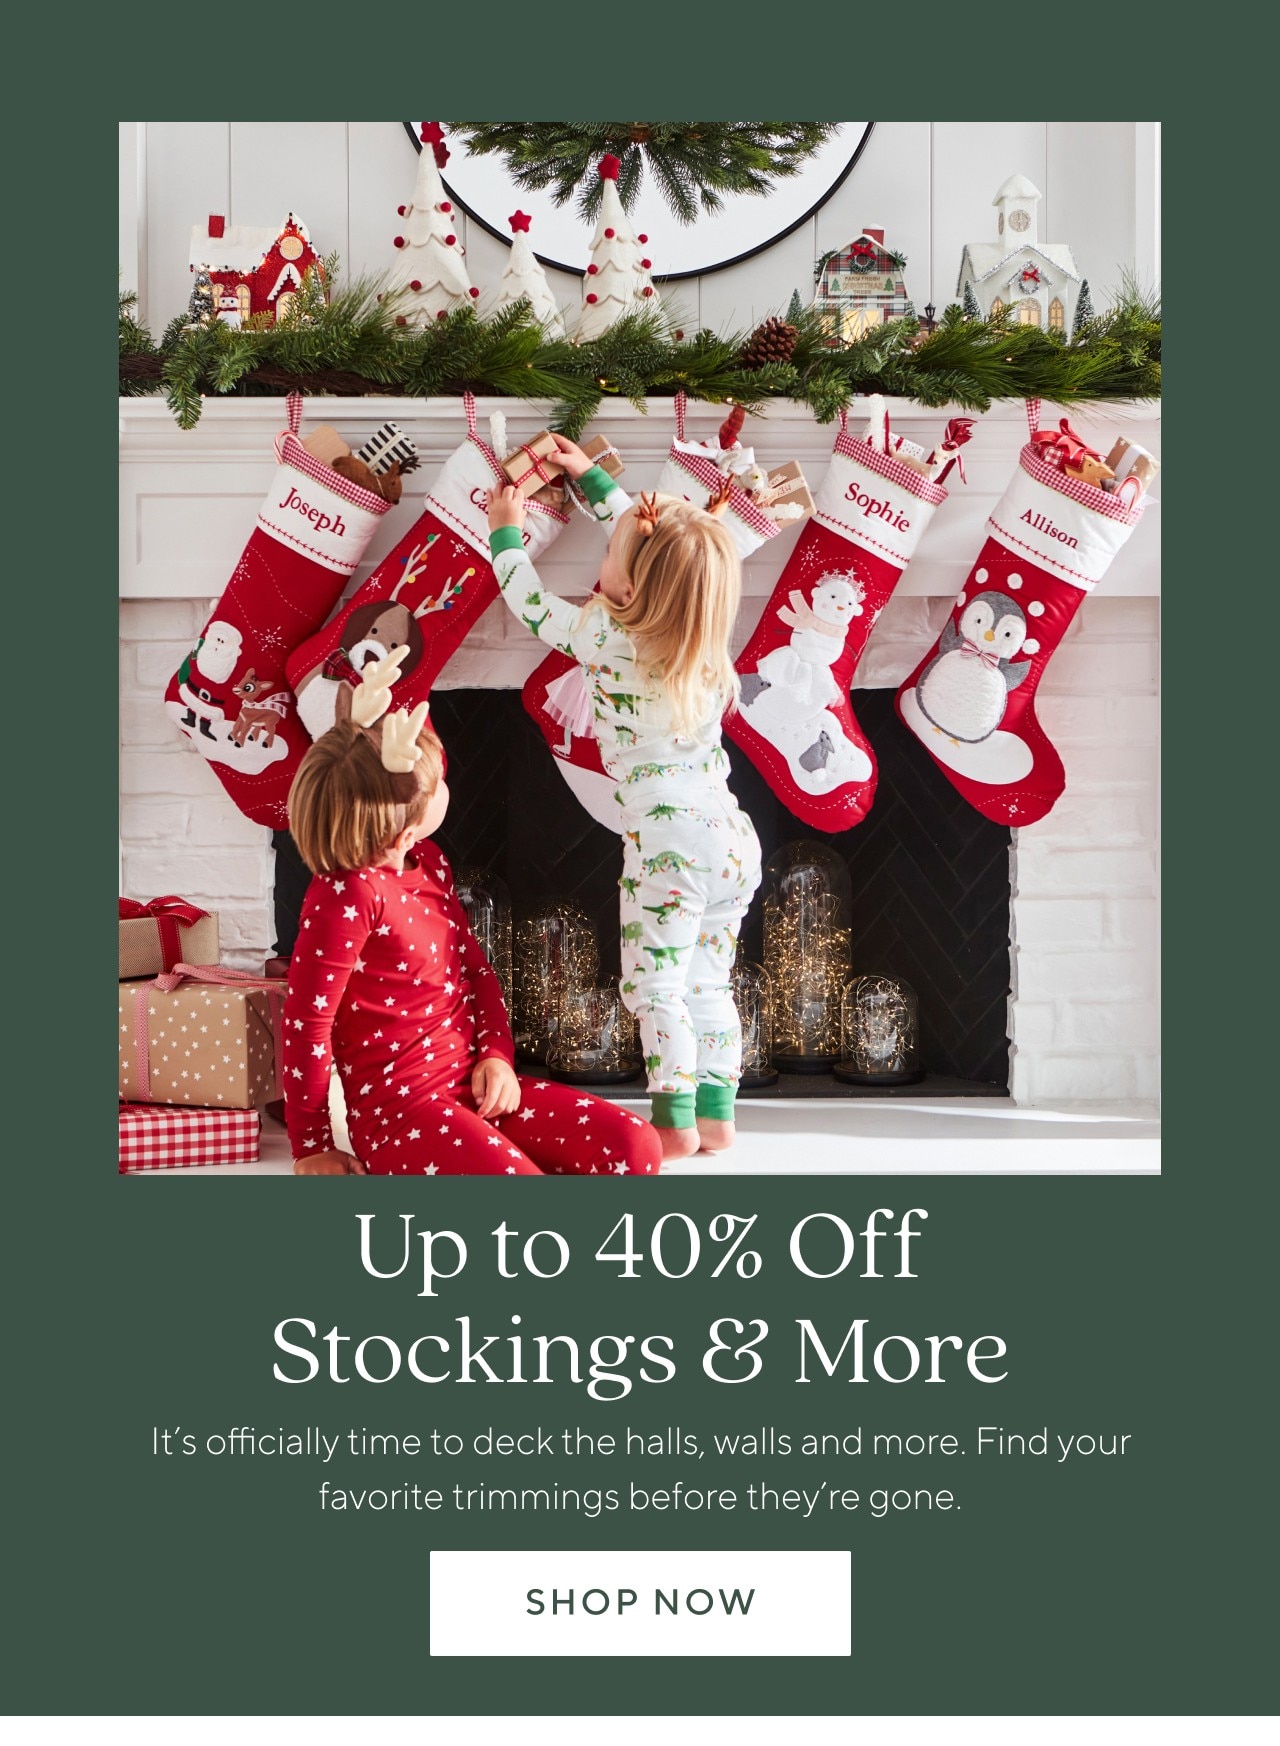 UP TO 40% OFF STOCKINGS & MORE